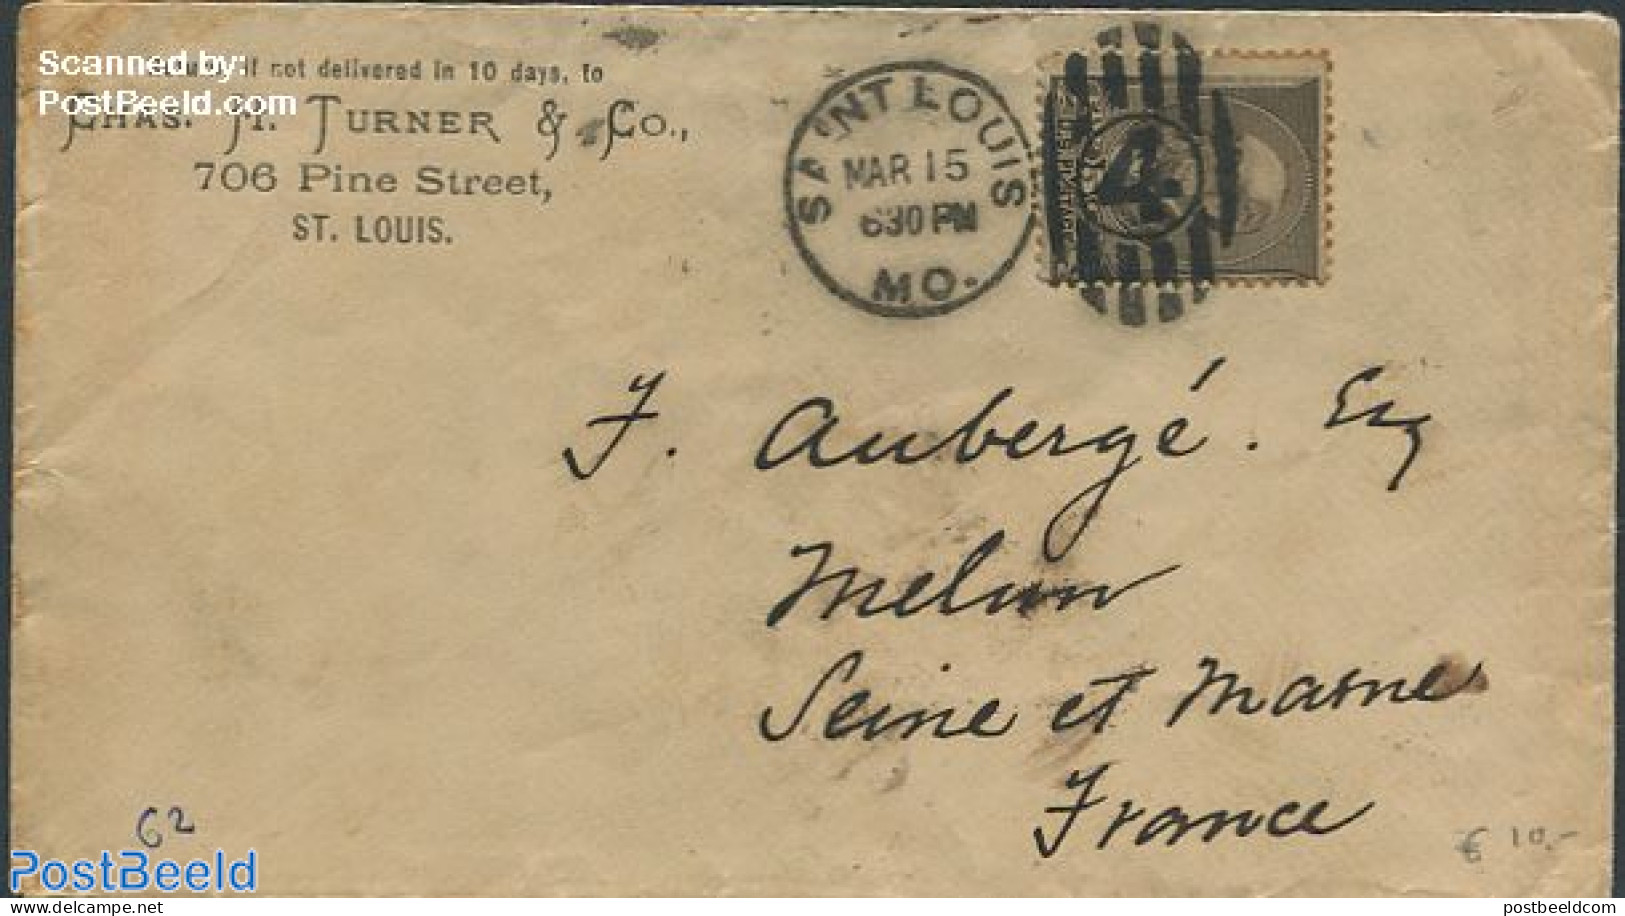 United States Of America 1888 Envelope From USA To France, Postal History - Briefe U. Dokumente